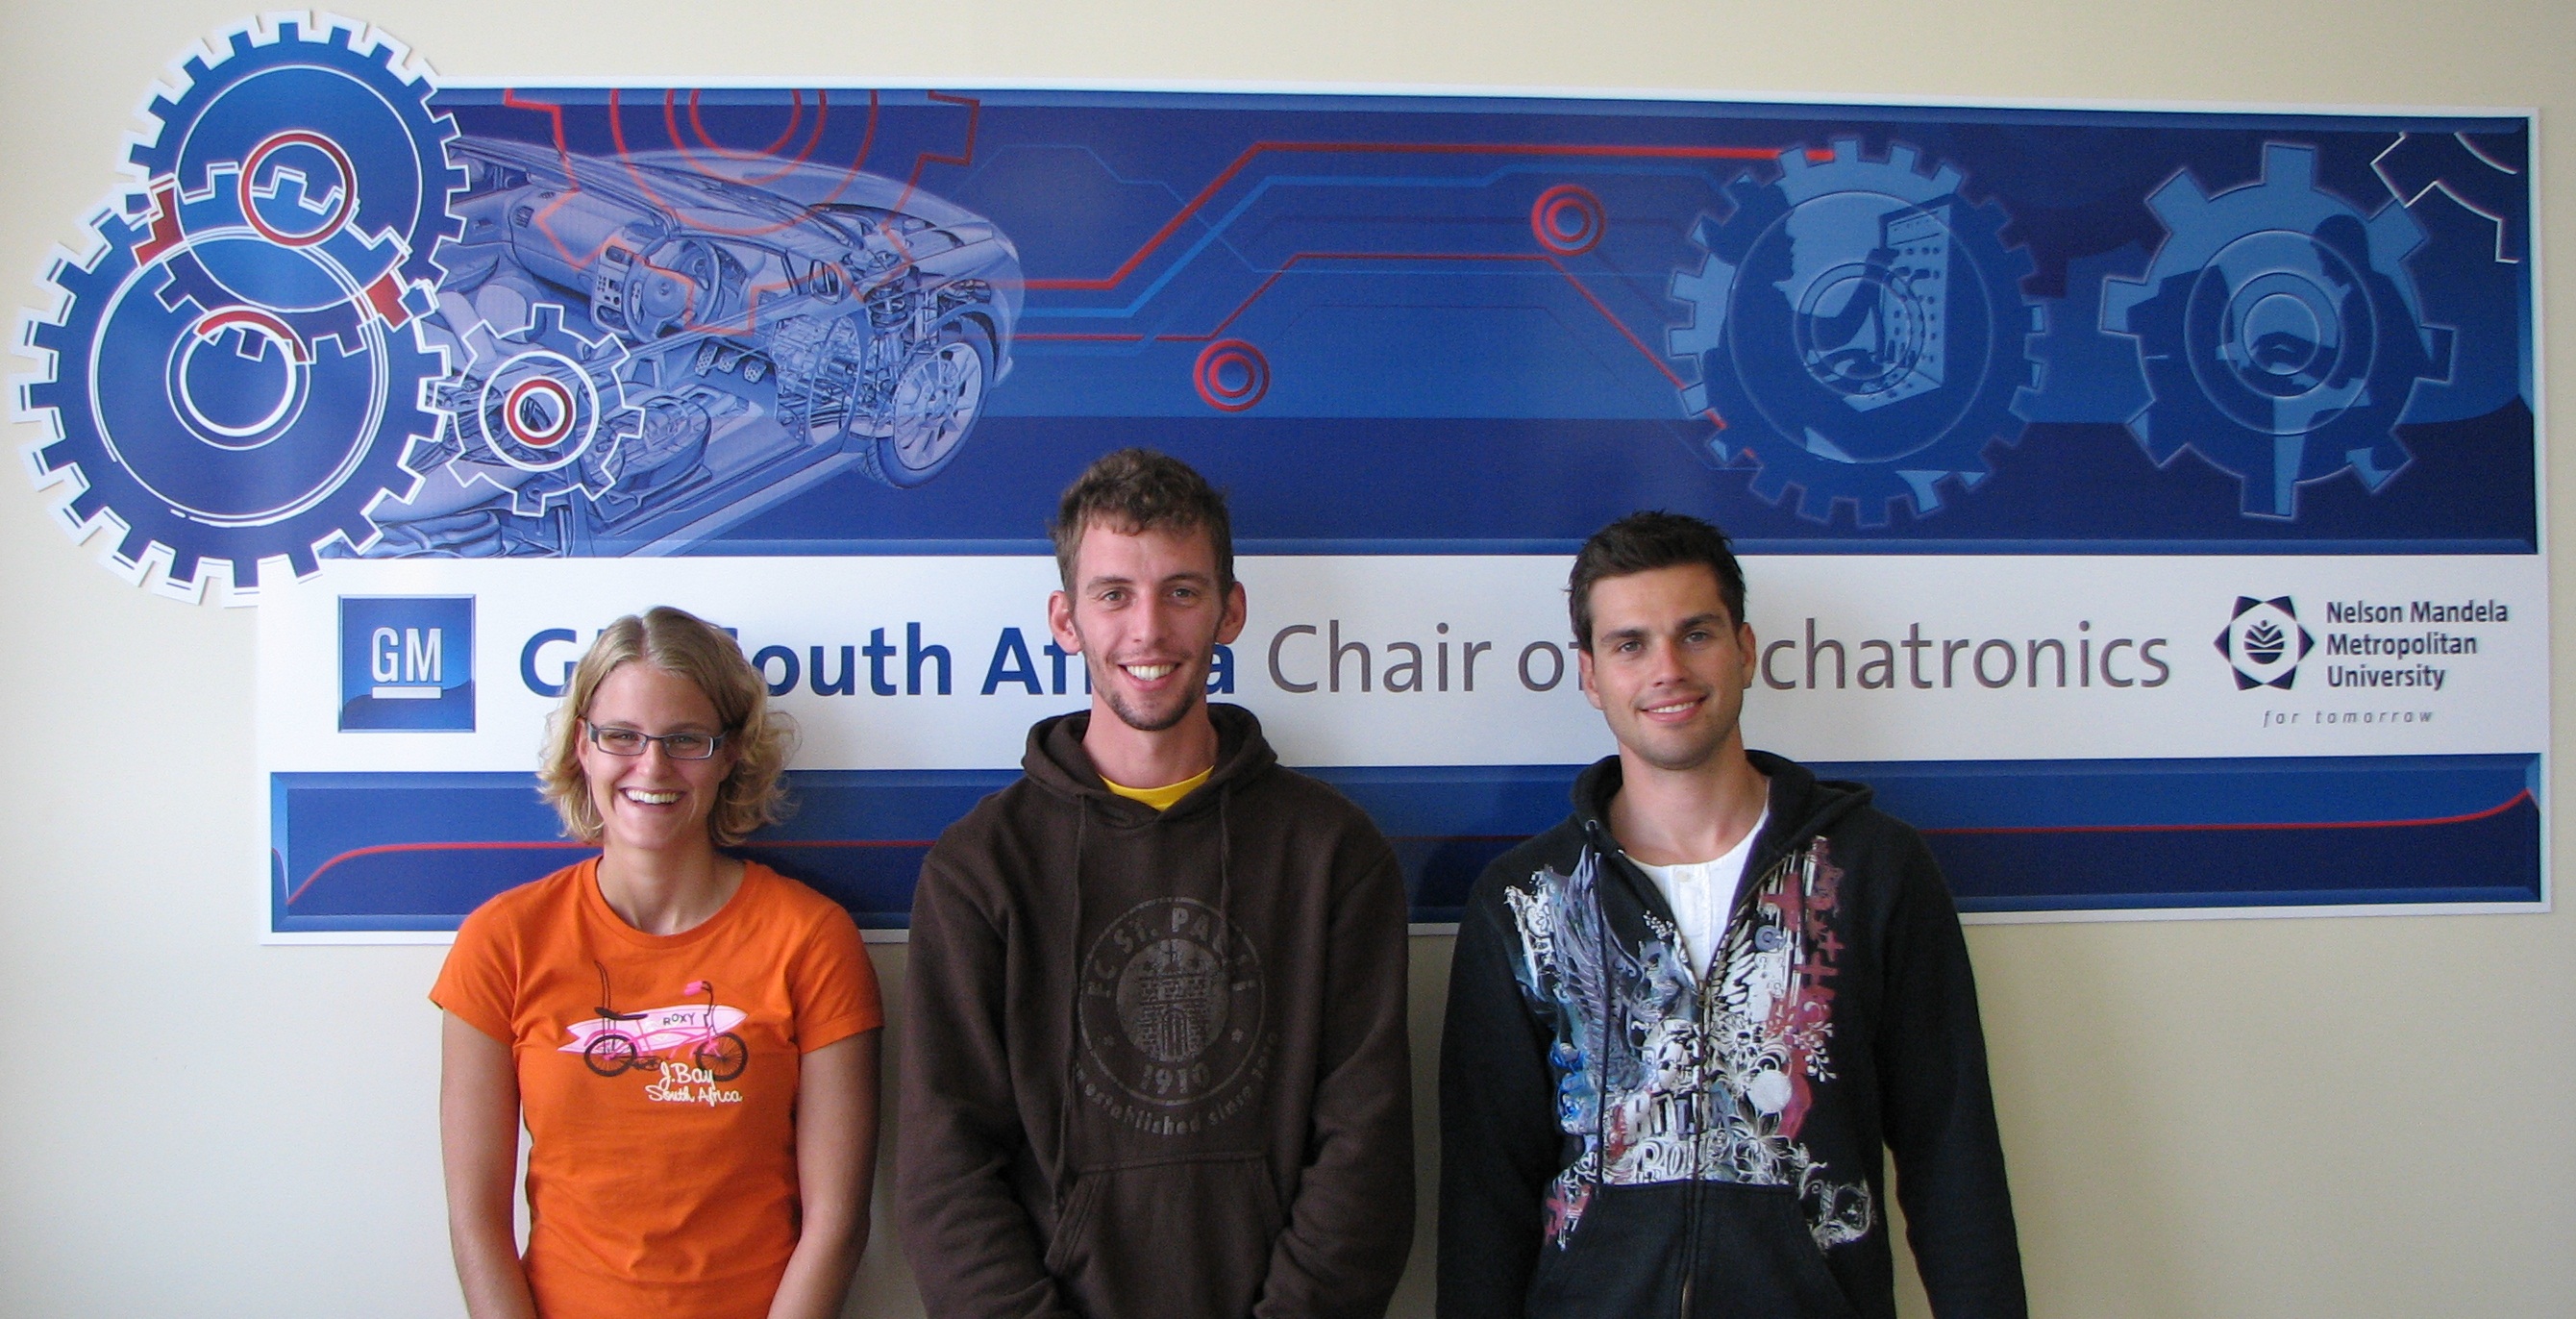 German students currently doing project at GMSA, Left to right: Jasmine Lang, Christian Schönknecht and Christoph Schumacher